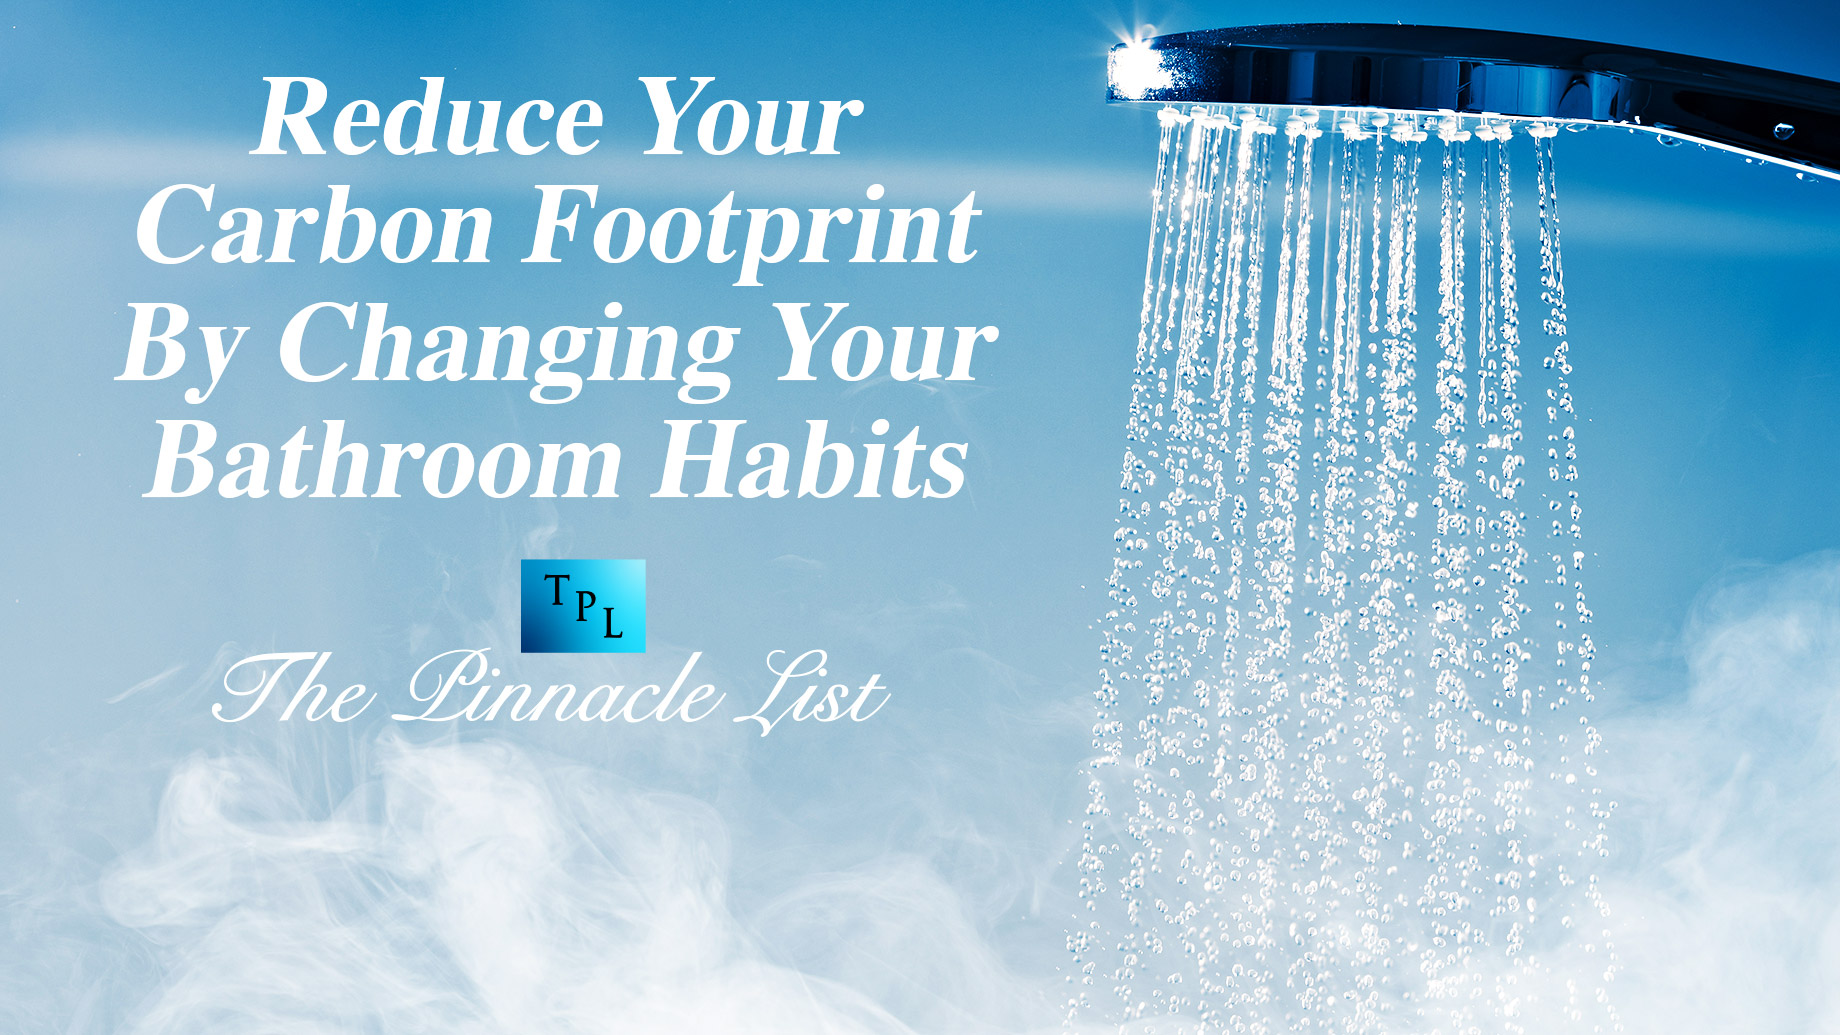 Reduce Your Carbon Footprint By Changing Your Bathroom Habits